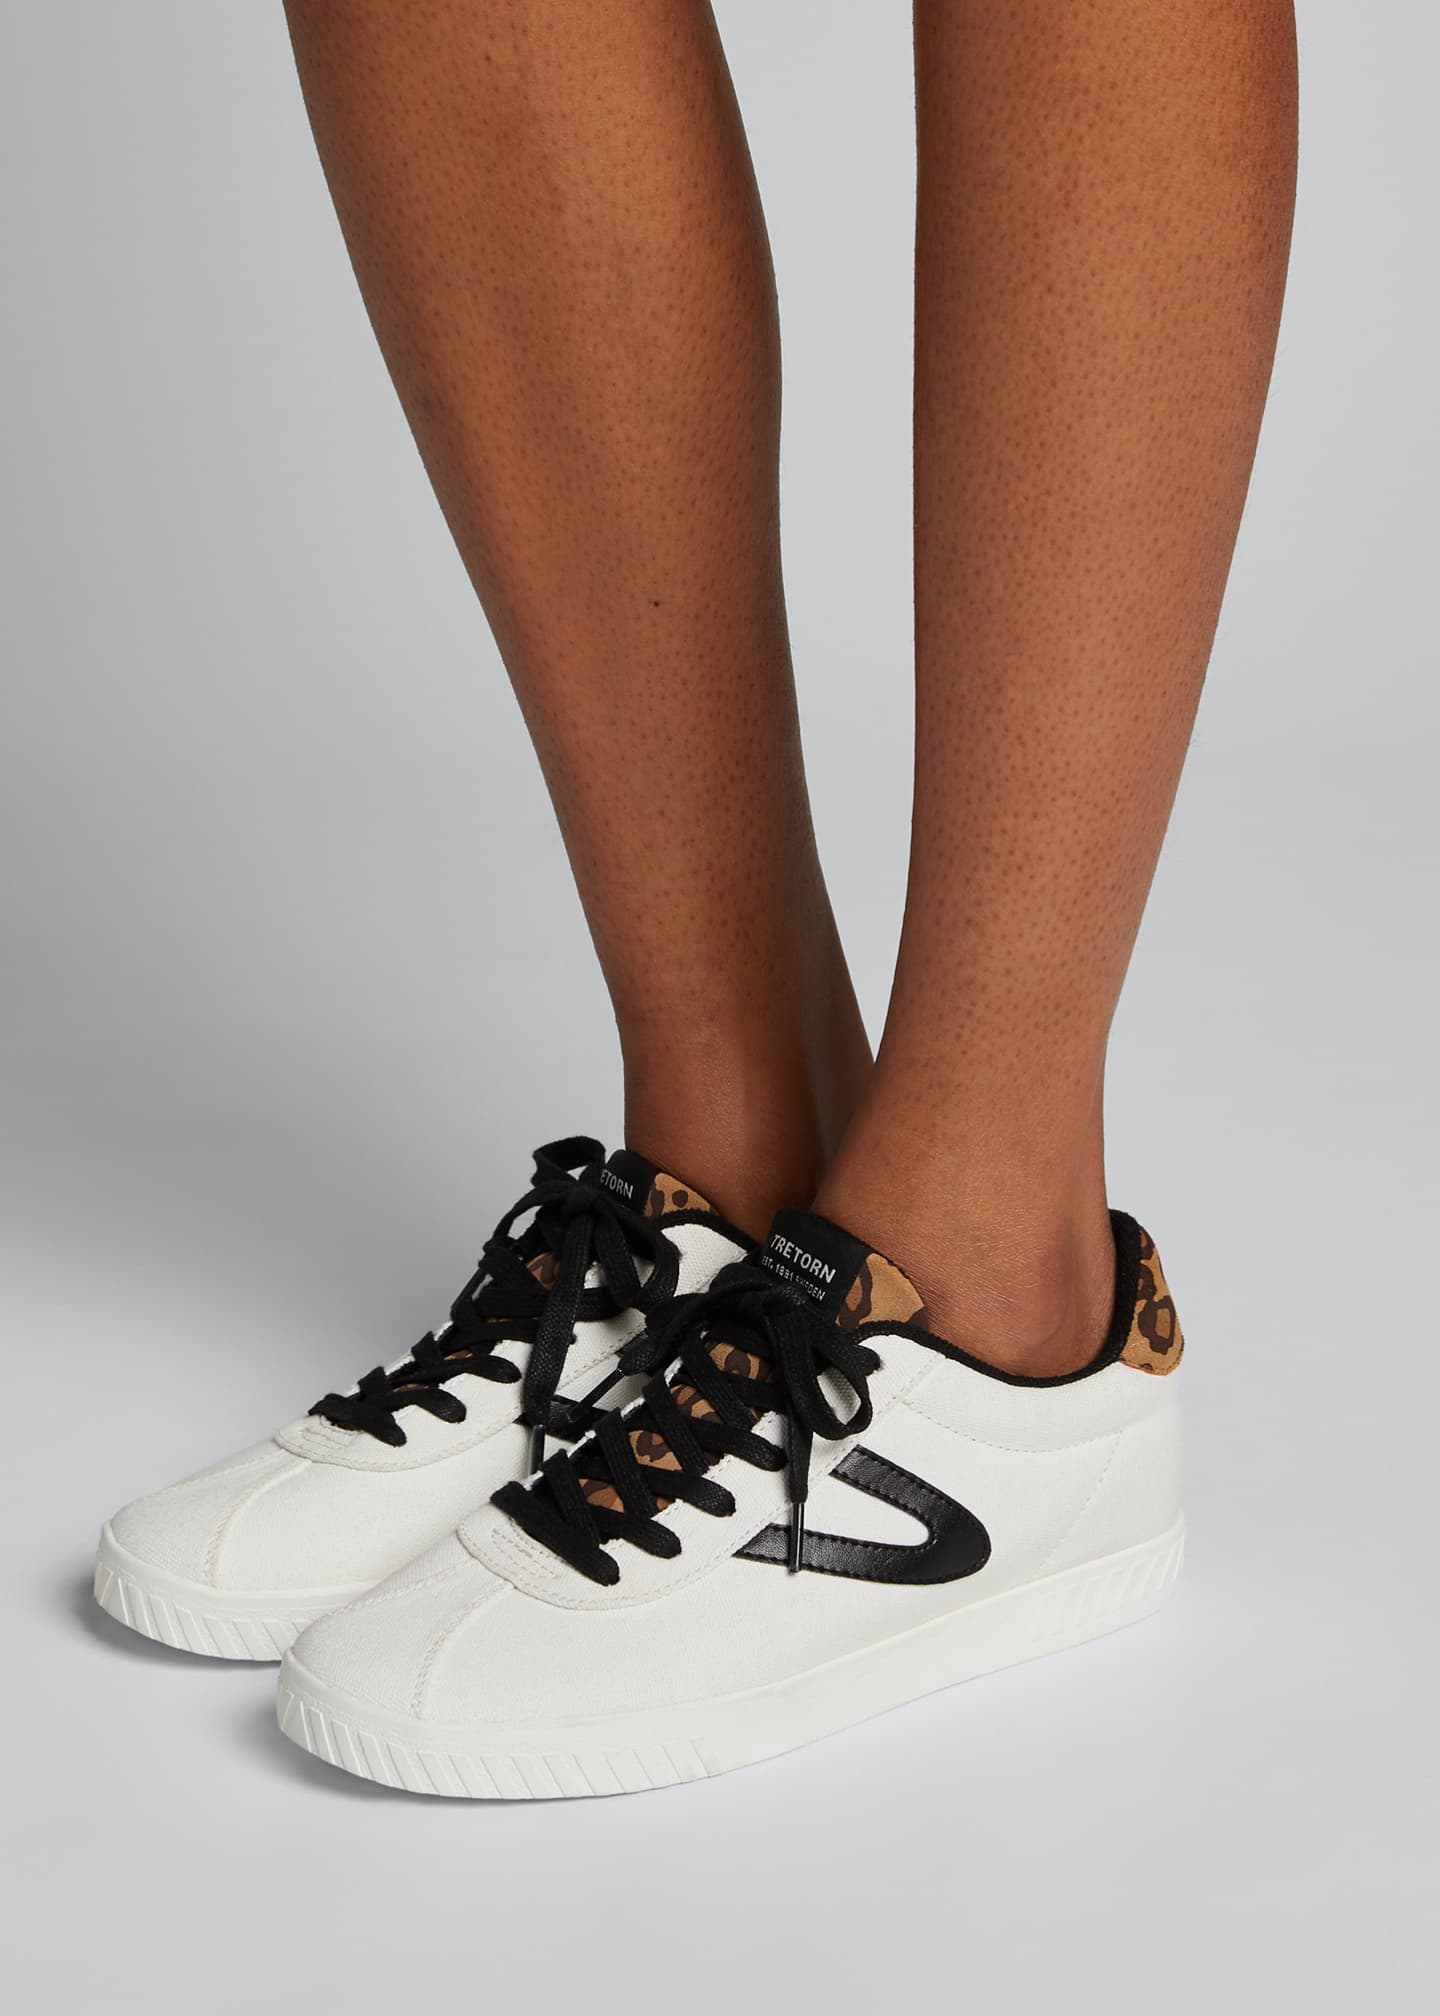 Tretorn Callie Leather Low-Top Sneakers 